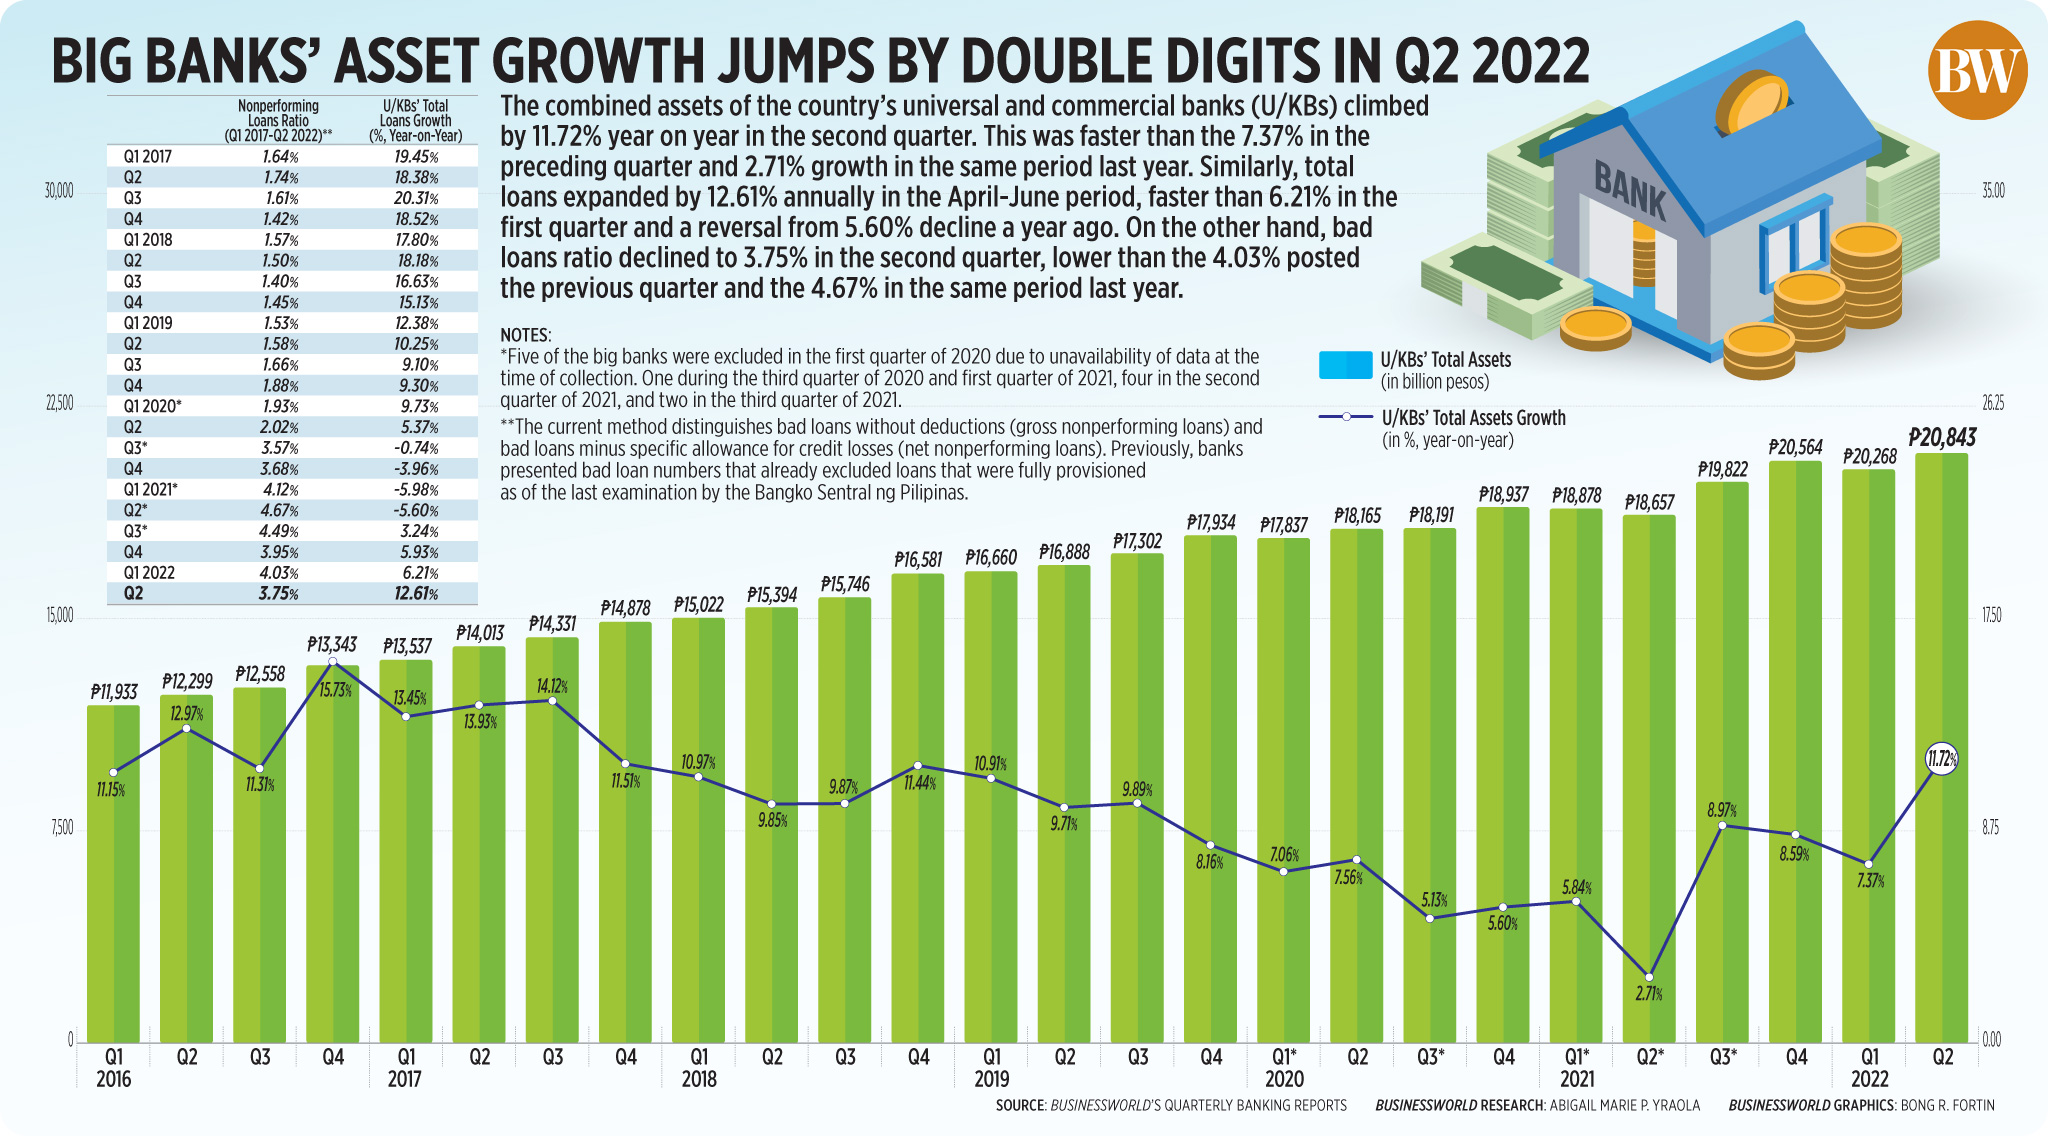 Big banks’ asset growth jumps by double digits in Q2 2022